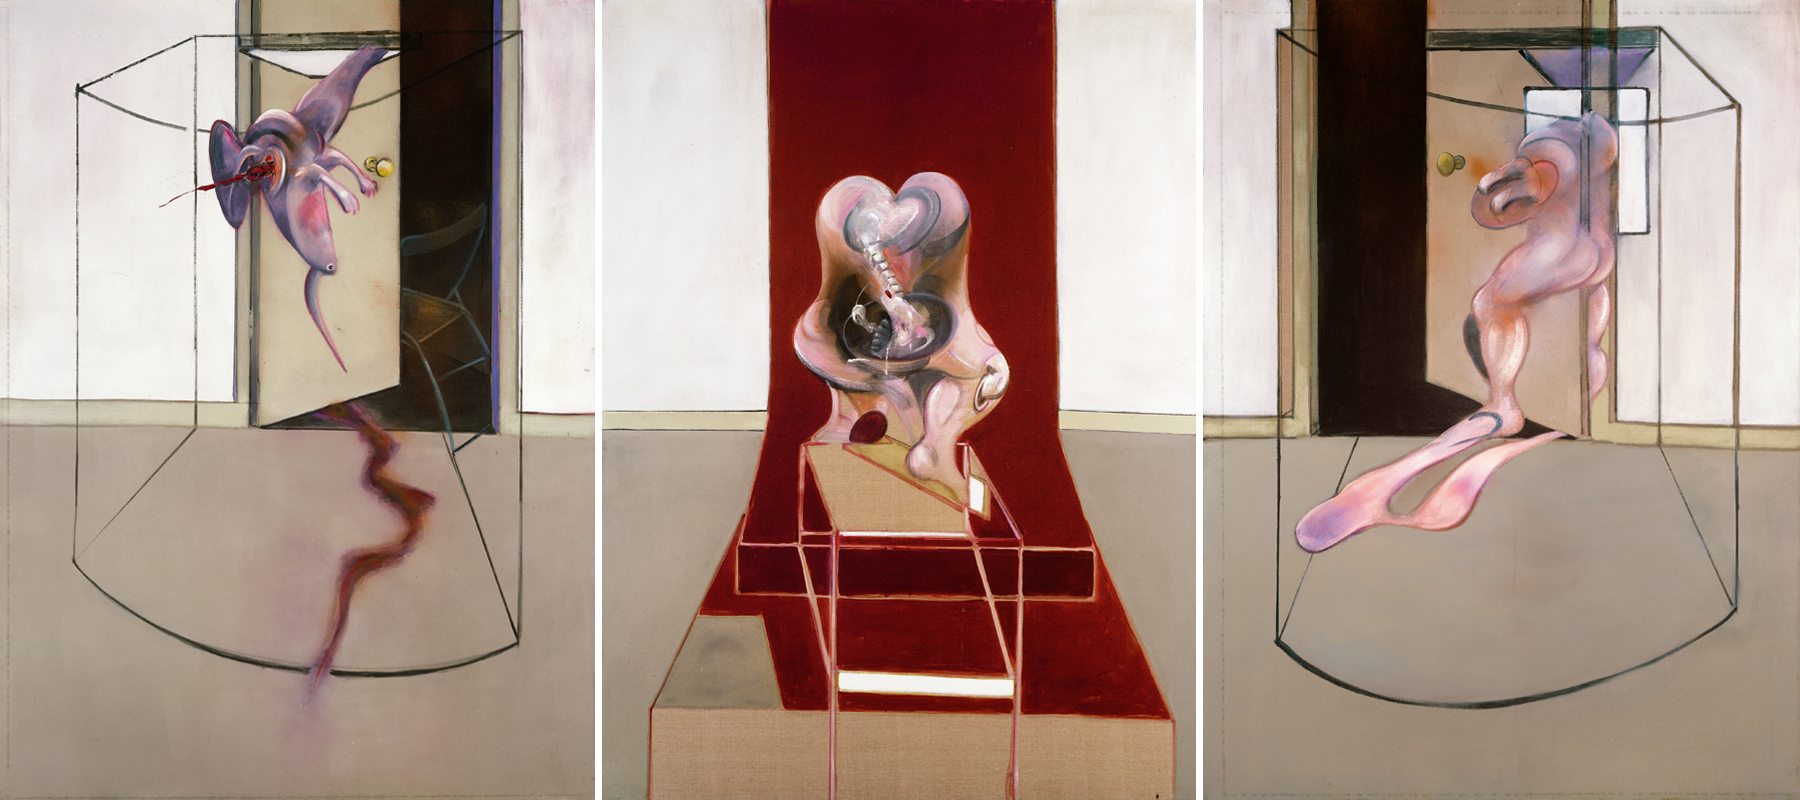 Francis Bacon, “Triptych Inspired by the Oresteia of Aeschylus” (1981) © The Estate of Francis Bacon /All rights reserved / Adagp, Paris and DACS, London 2019 © The Estate of Francis Bacon. All rights reserved. DACS/Artimage 2019. Photo: Prudence Cuming Associates Ltd